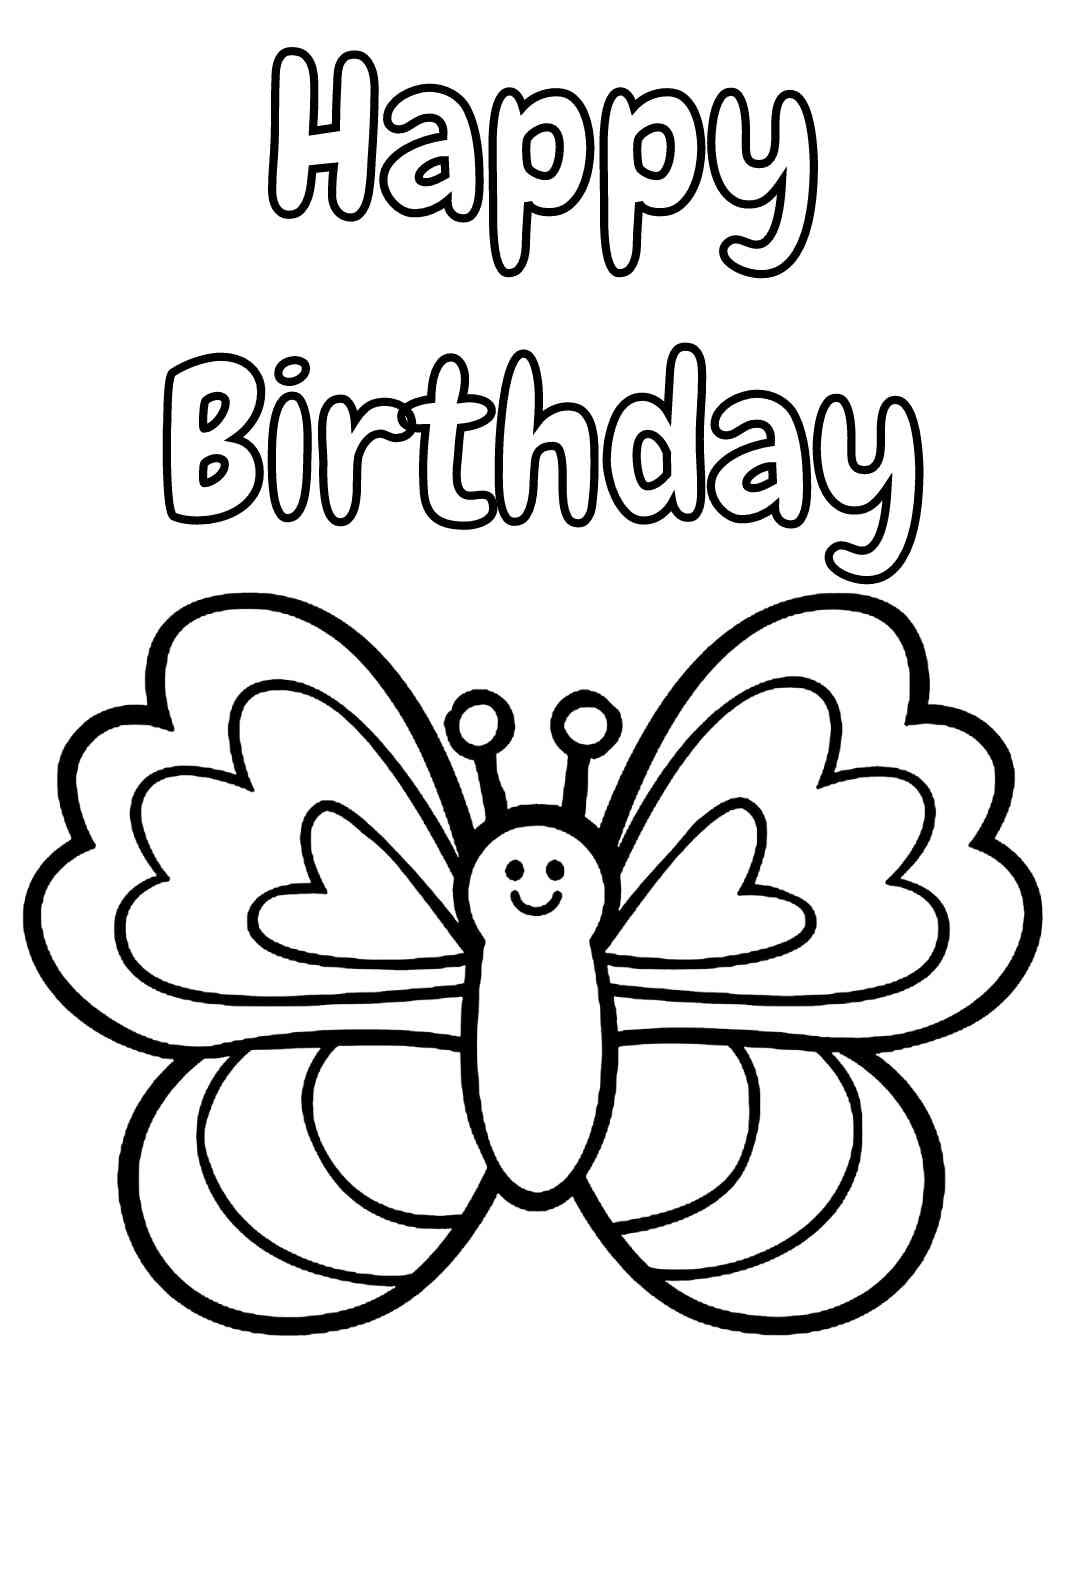 10 Cute Printable Birthday Cards for 9 Year Olds (free) — PRINTBIRTHDAY ...